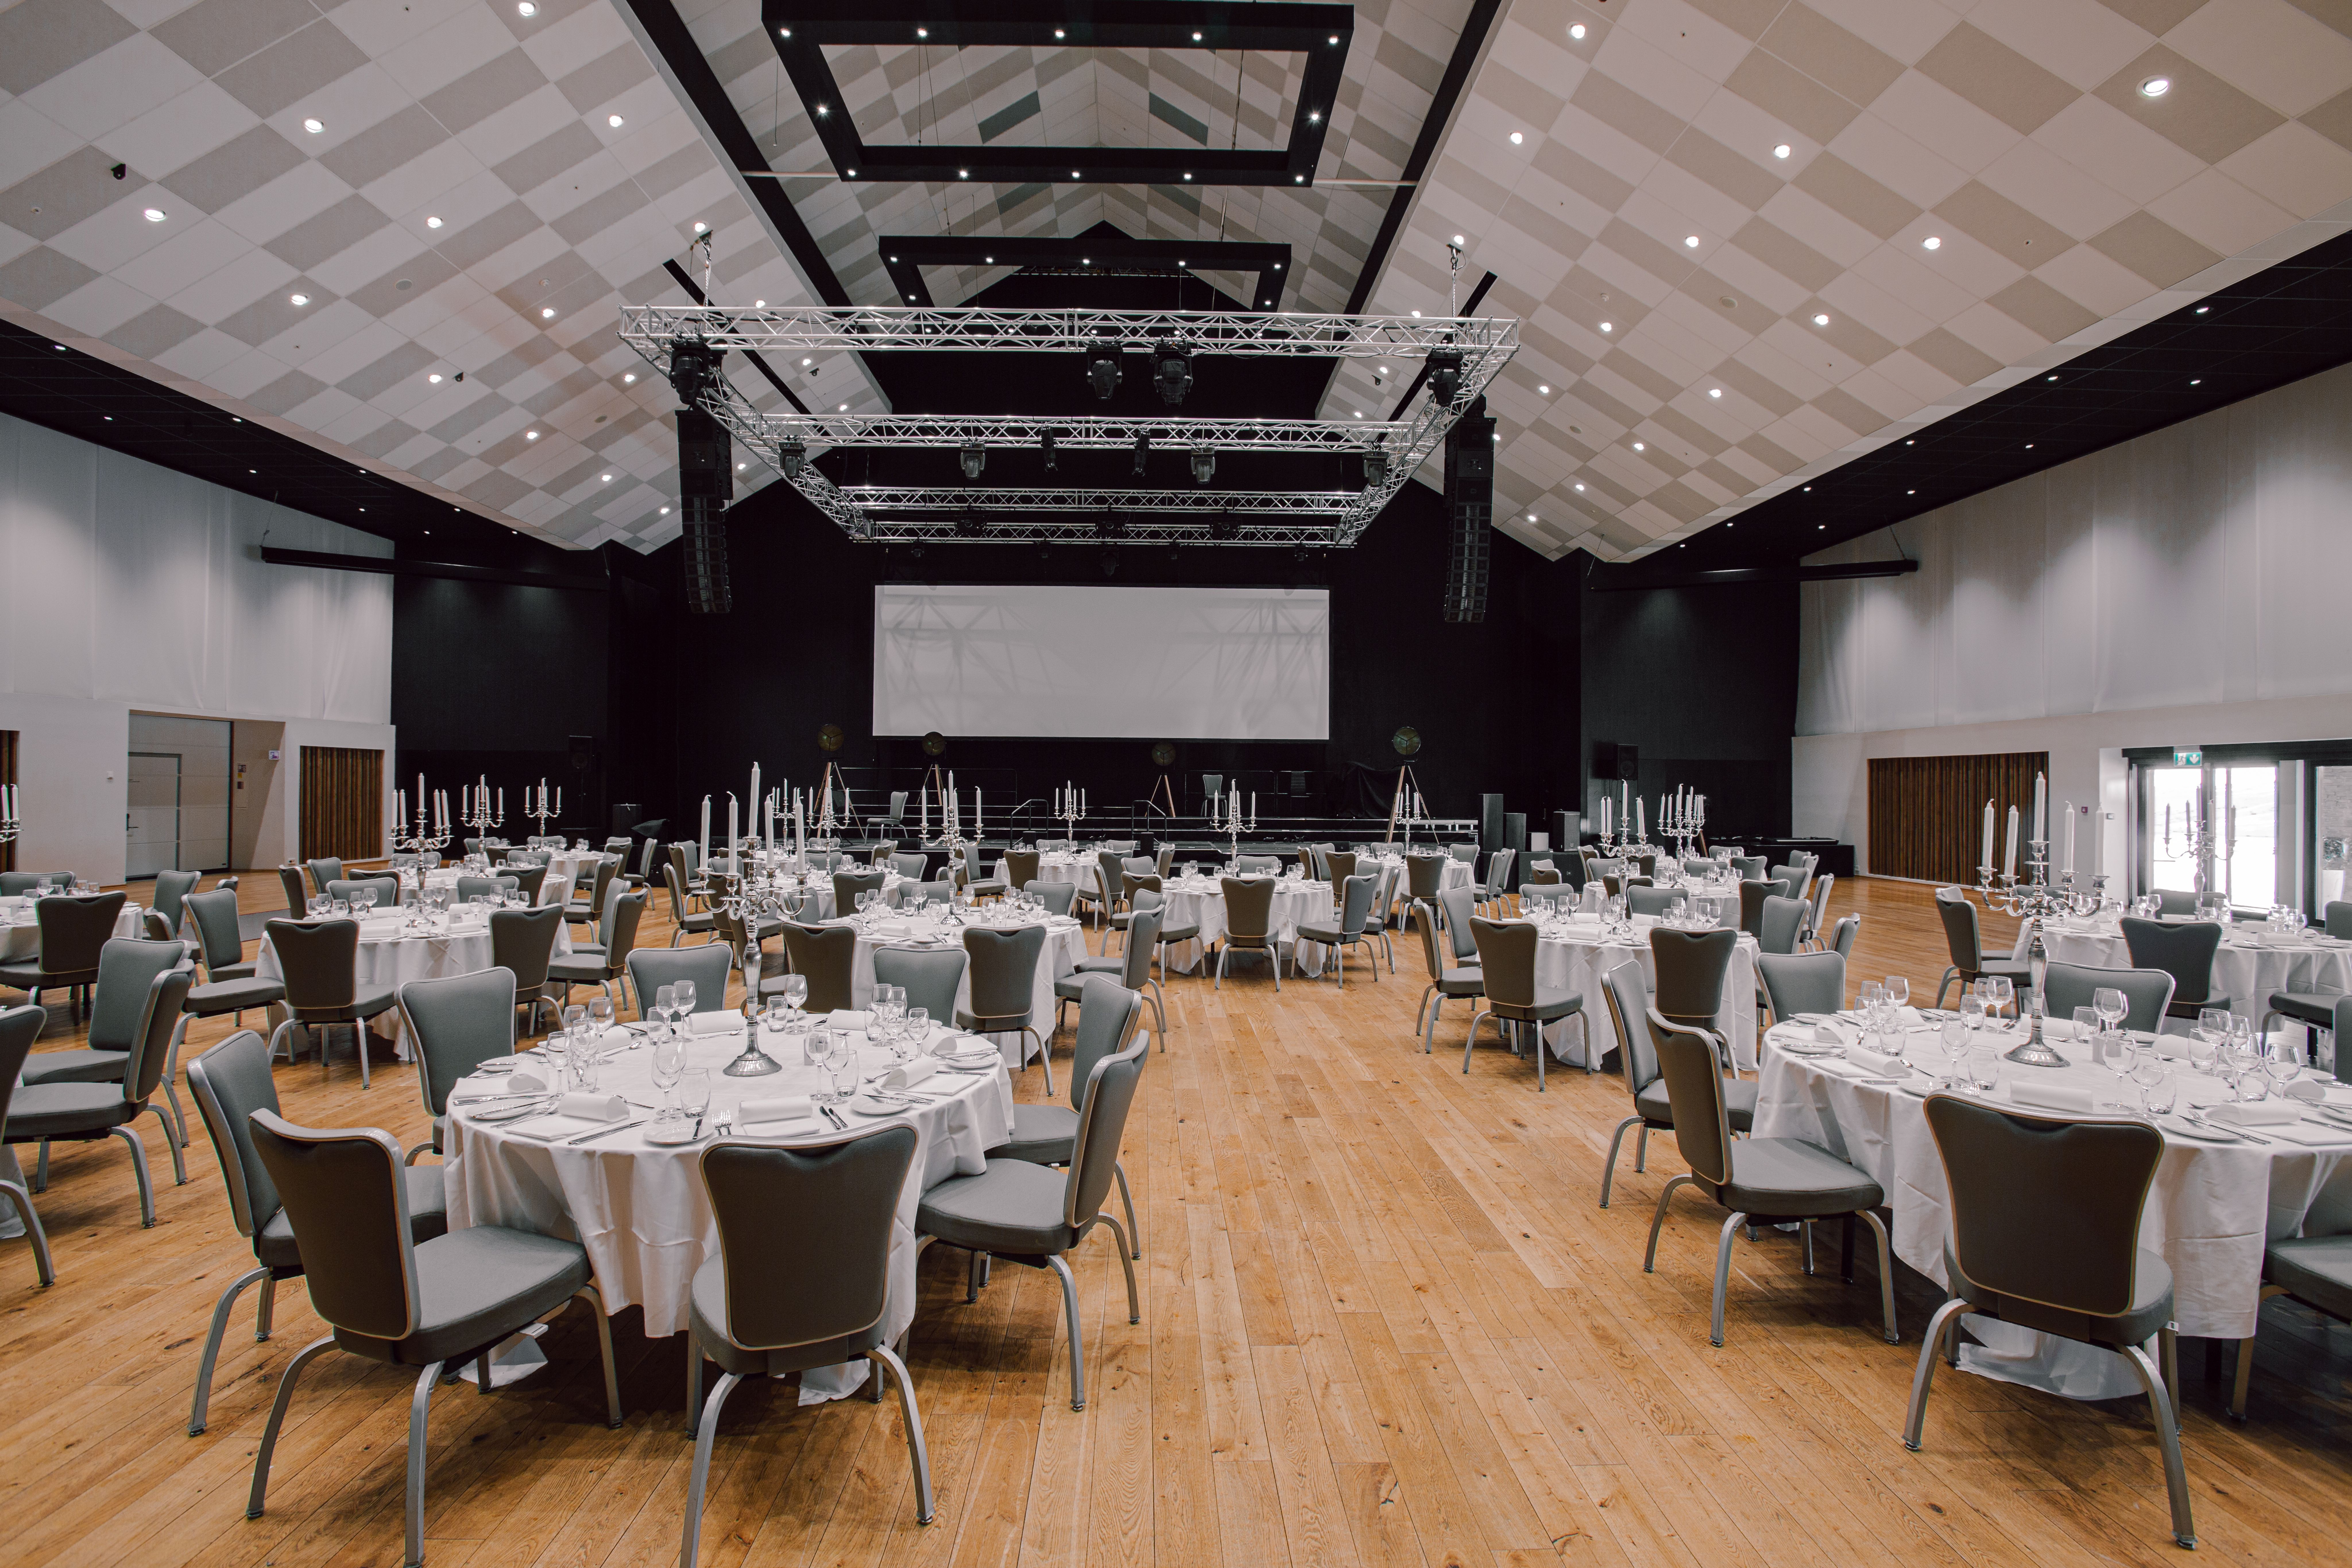 Many round tables set for feast in our largest hall; The Panorama hall